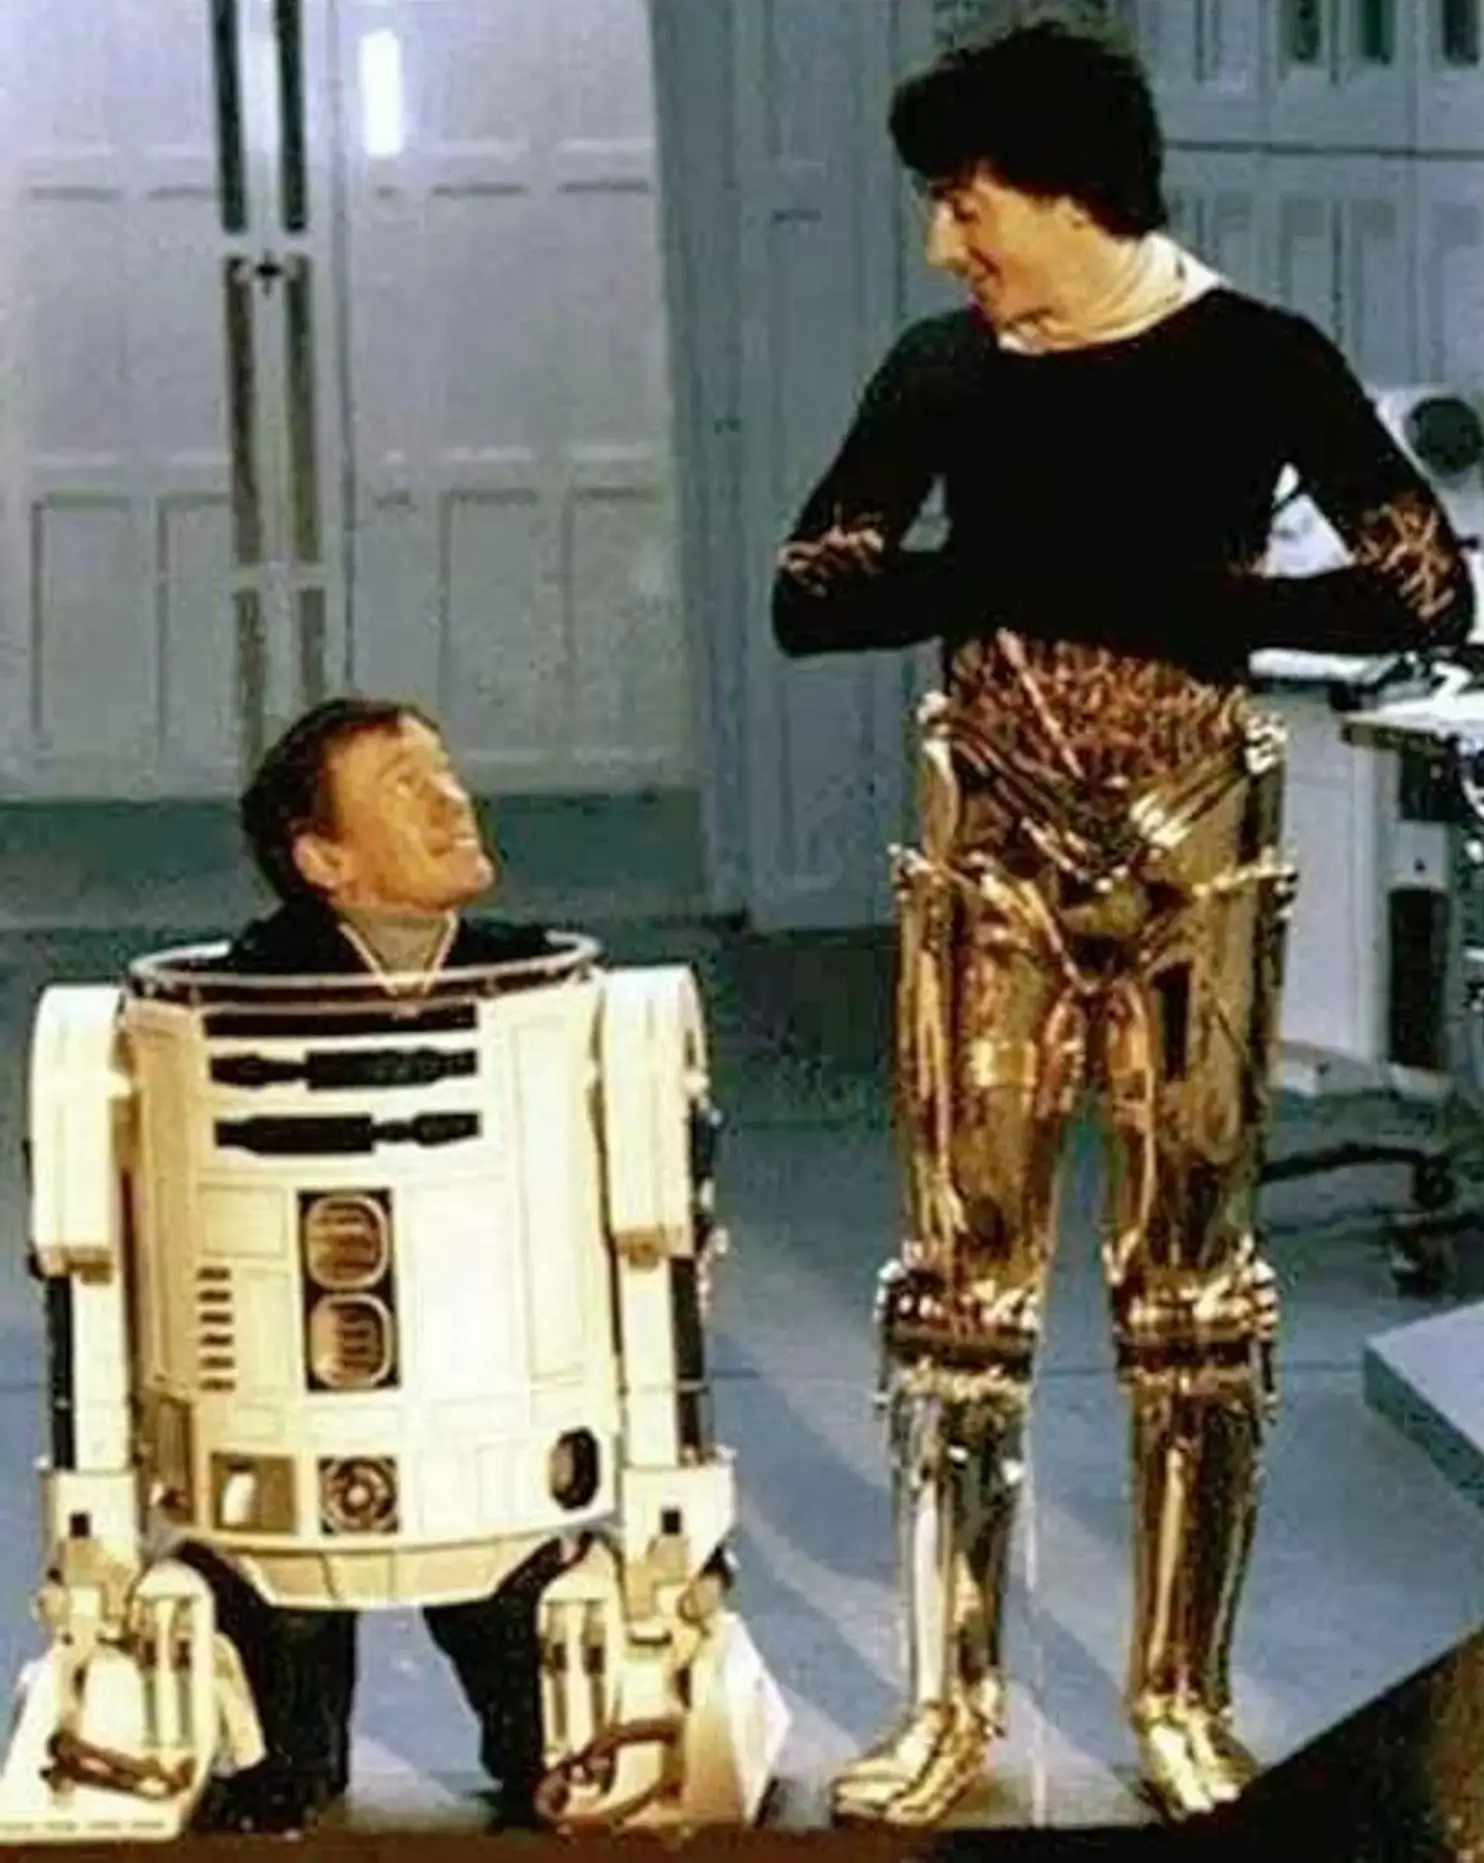 Kenny Baker pokes his head out of the top of his R2-D2 costume, looking up at Anthony Daniels, wearing the legs of this C-3P0 costume.